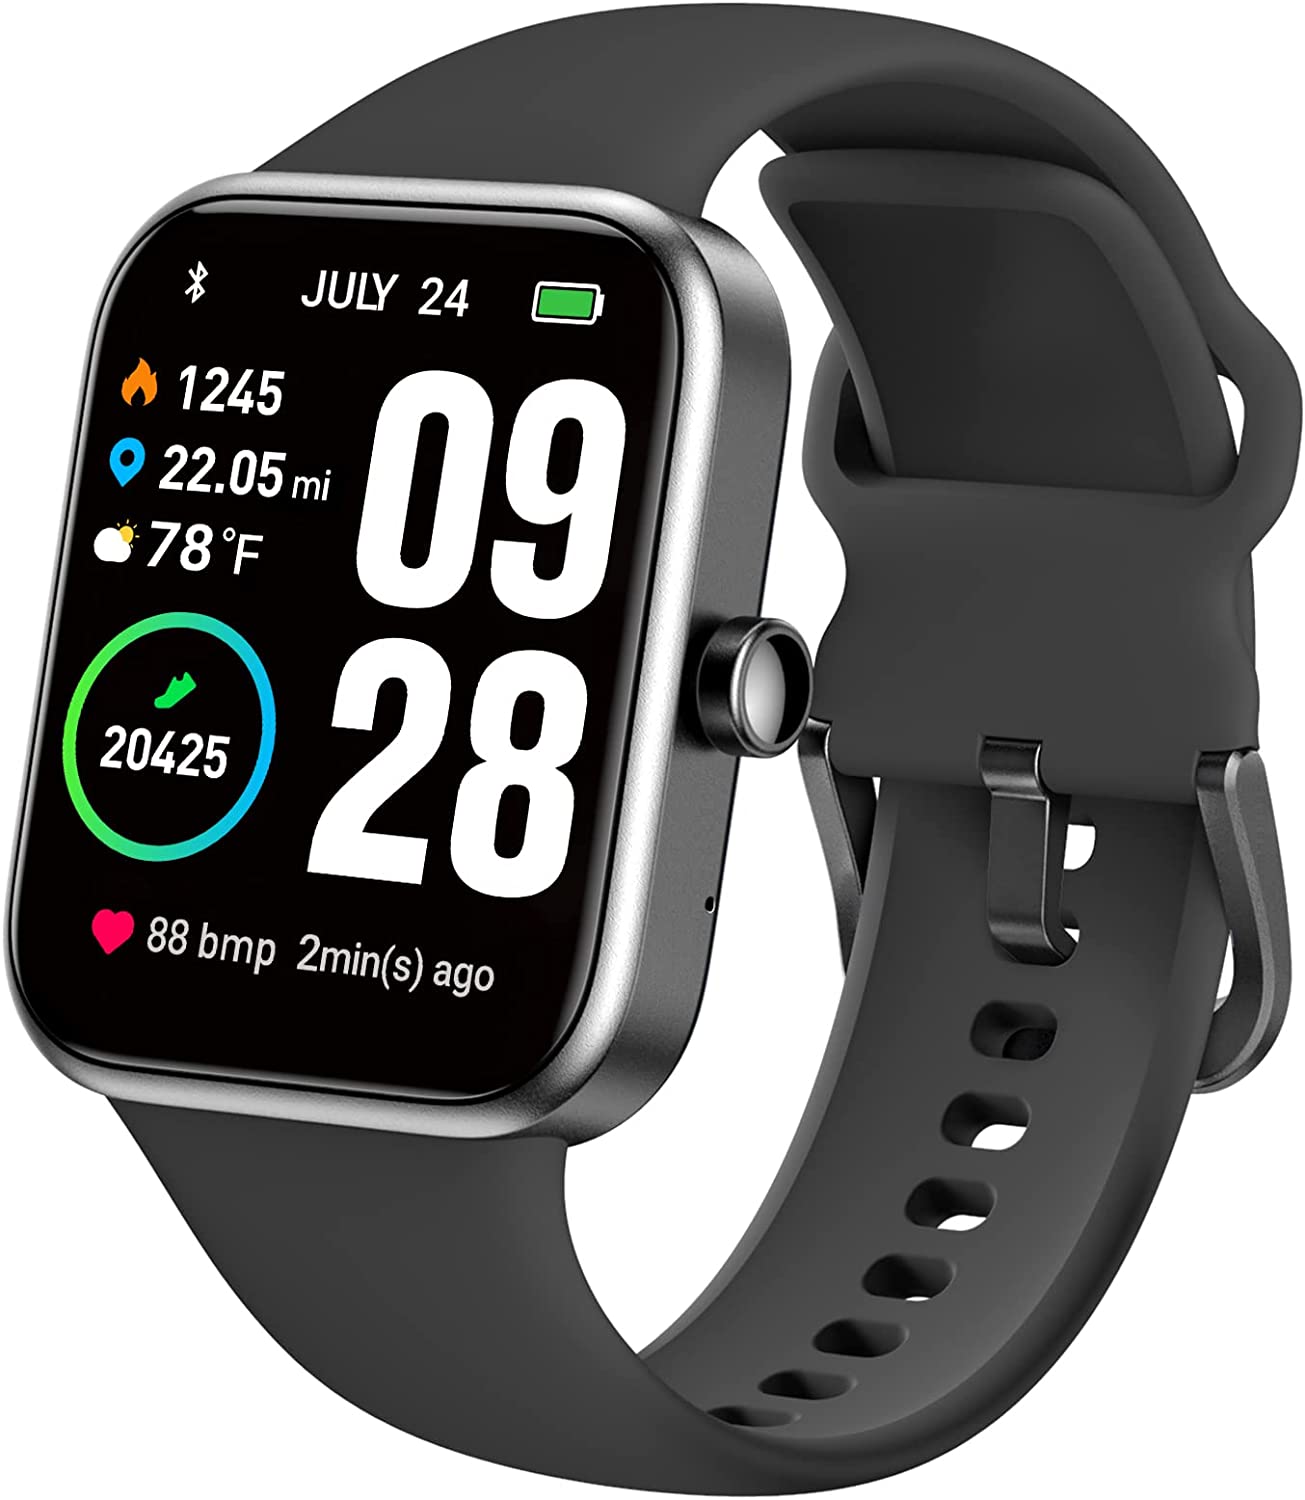 TOZO S2 44mm Smart Watch – Just $27.99 at Amazon